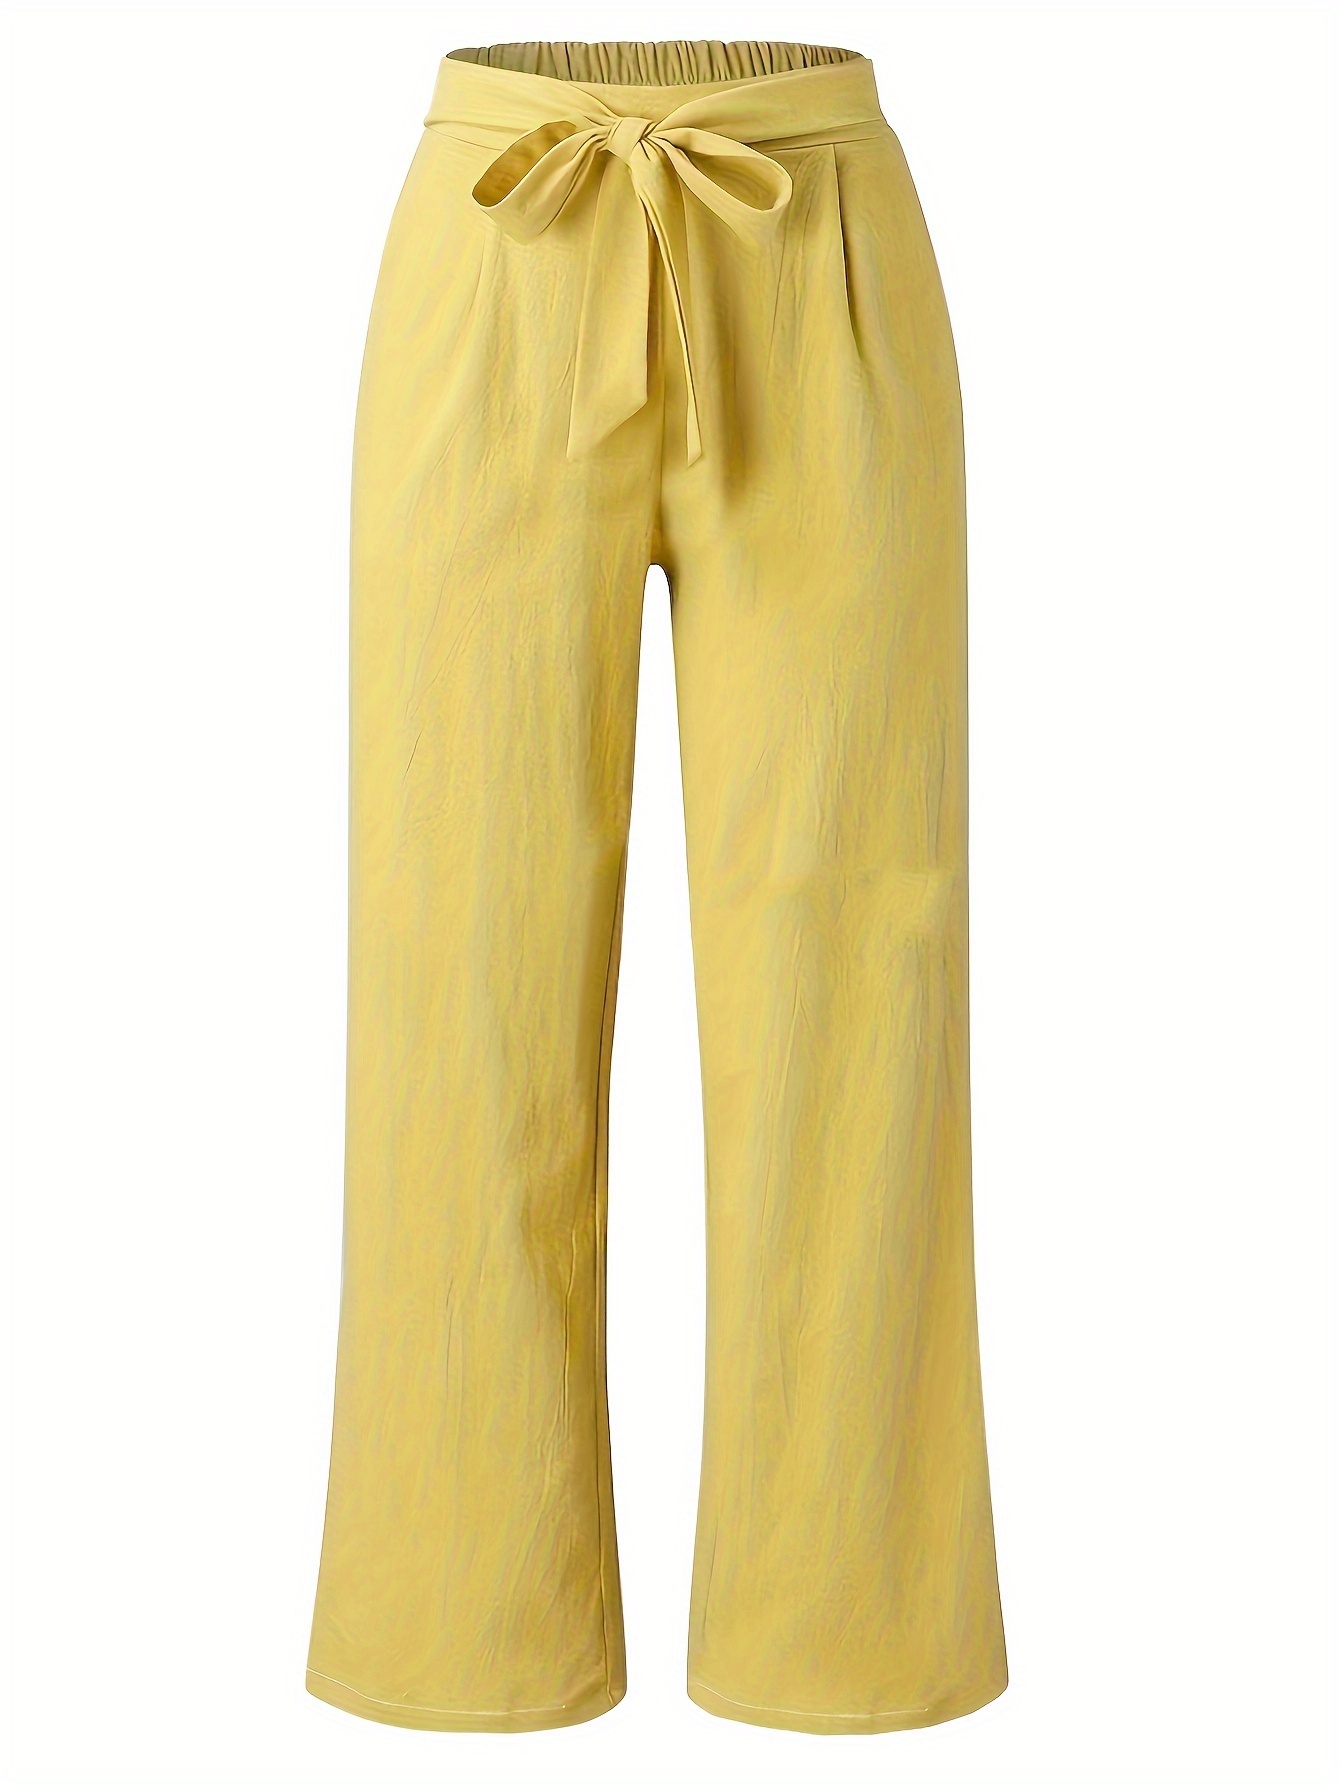 Fashion (Yellow)Women 2022 Spring Summer Fashion Solid Color Dance Pants  Female High Waist Wide Leg Pants Ladies Casual Loose Dance Trousers H59 DOU  @ Best Price Online